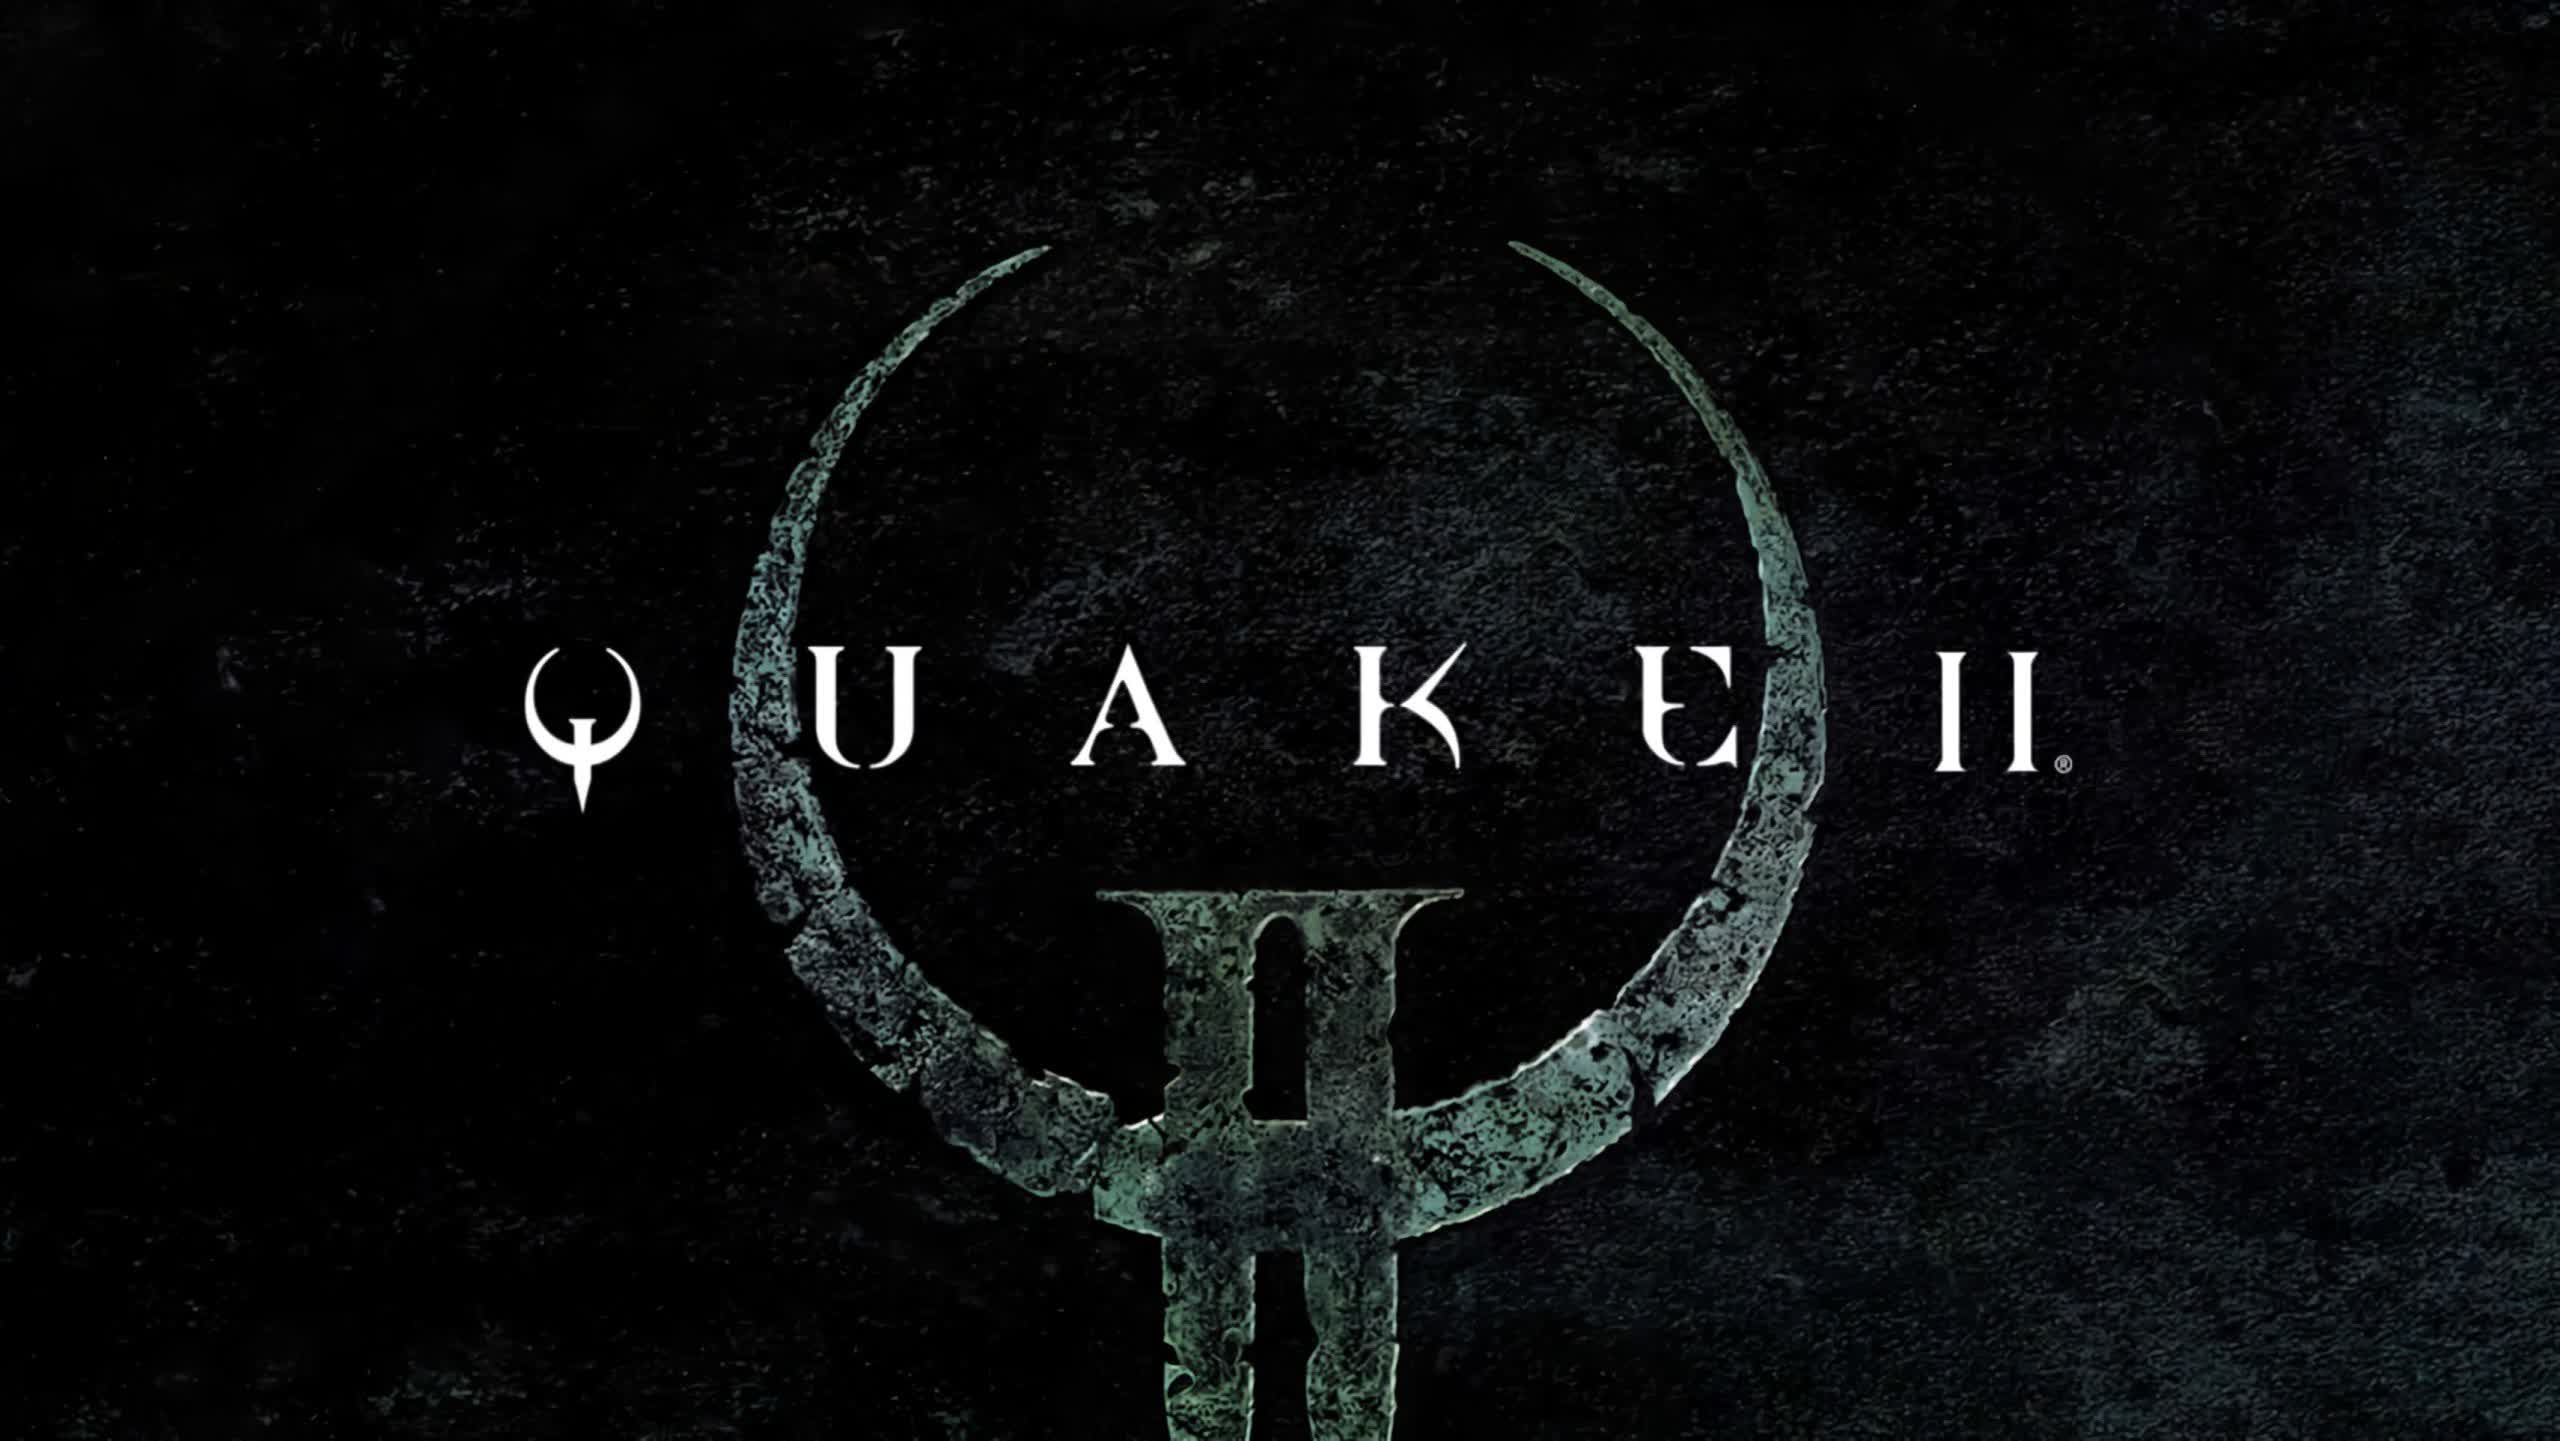 Quake II remaster appears on Korean ratings board, signaling imminent release